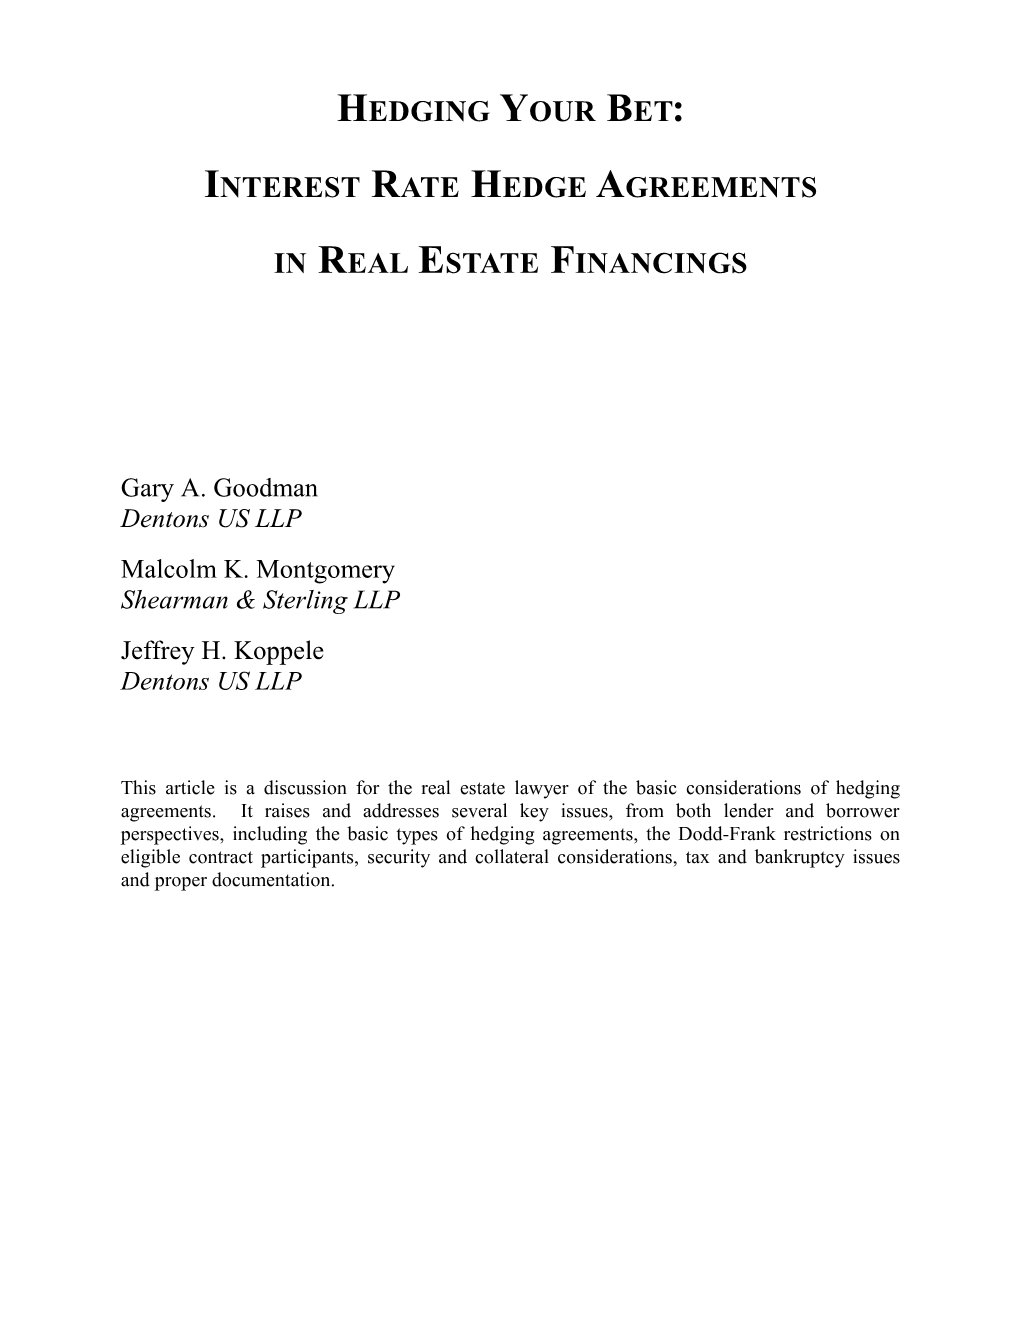 Interest Rate Hedge Agreements